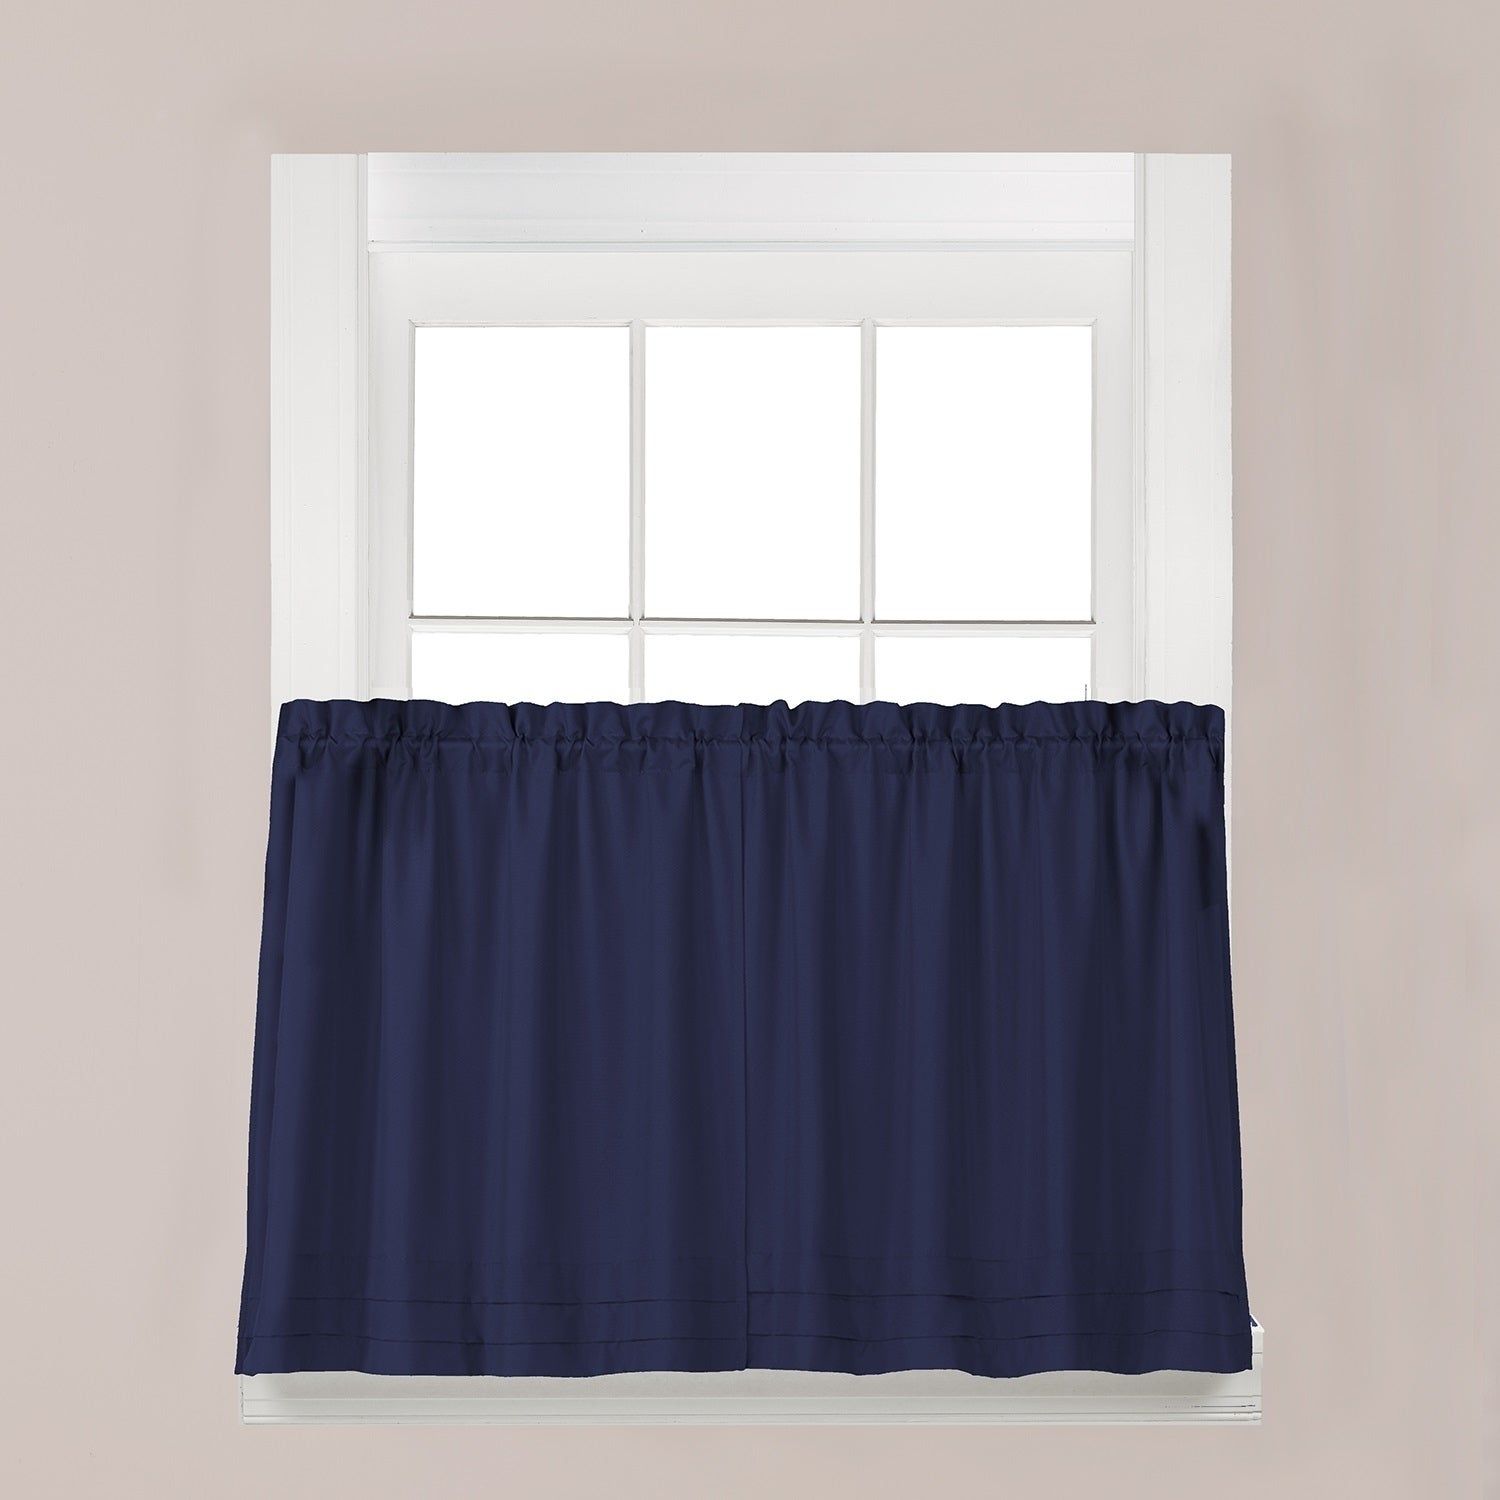 The Gray Barn Flinders Forge 45 Inch Tier Pair In Navy Within Flinders Forge 24 Inch Tier Pairs In Navy (View 1 of 20)